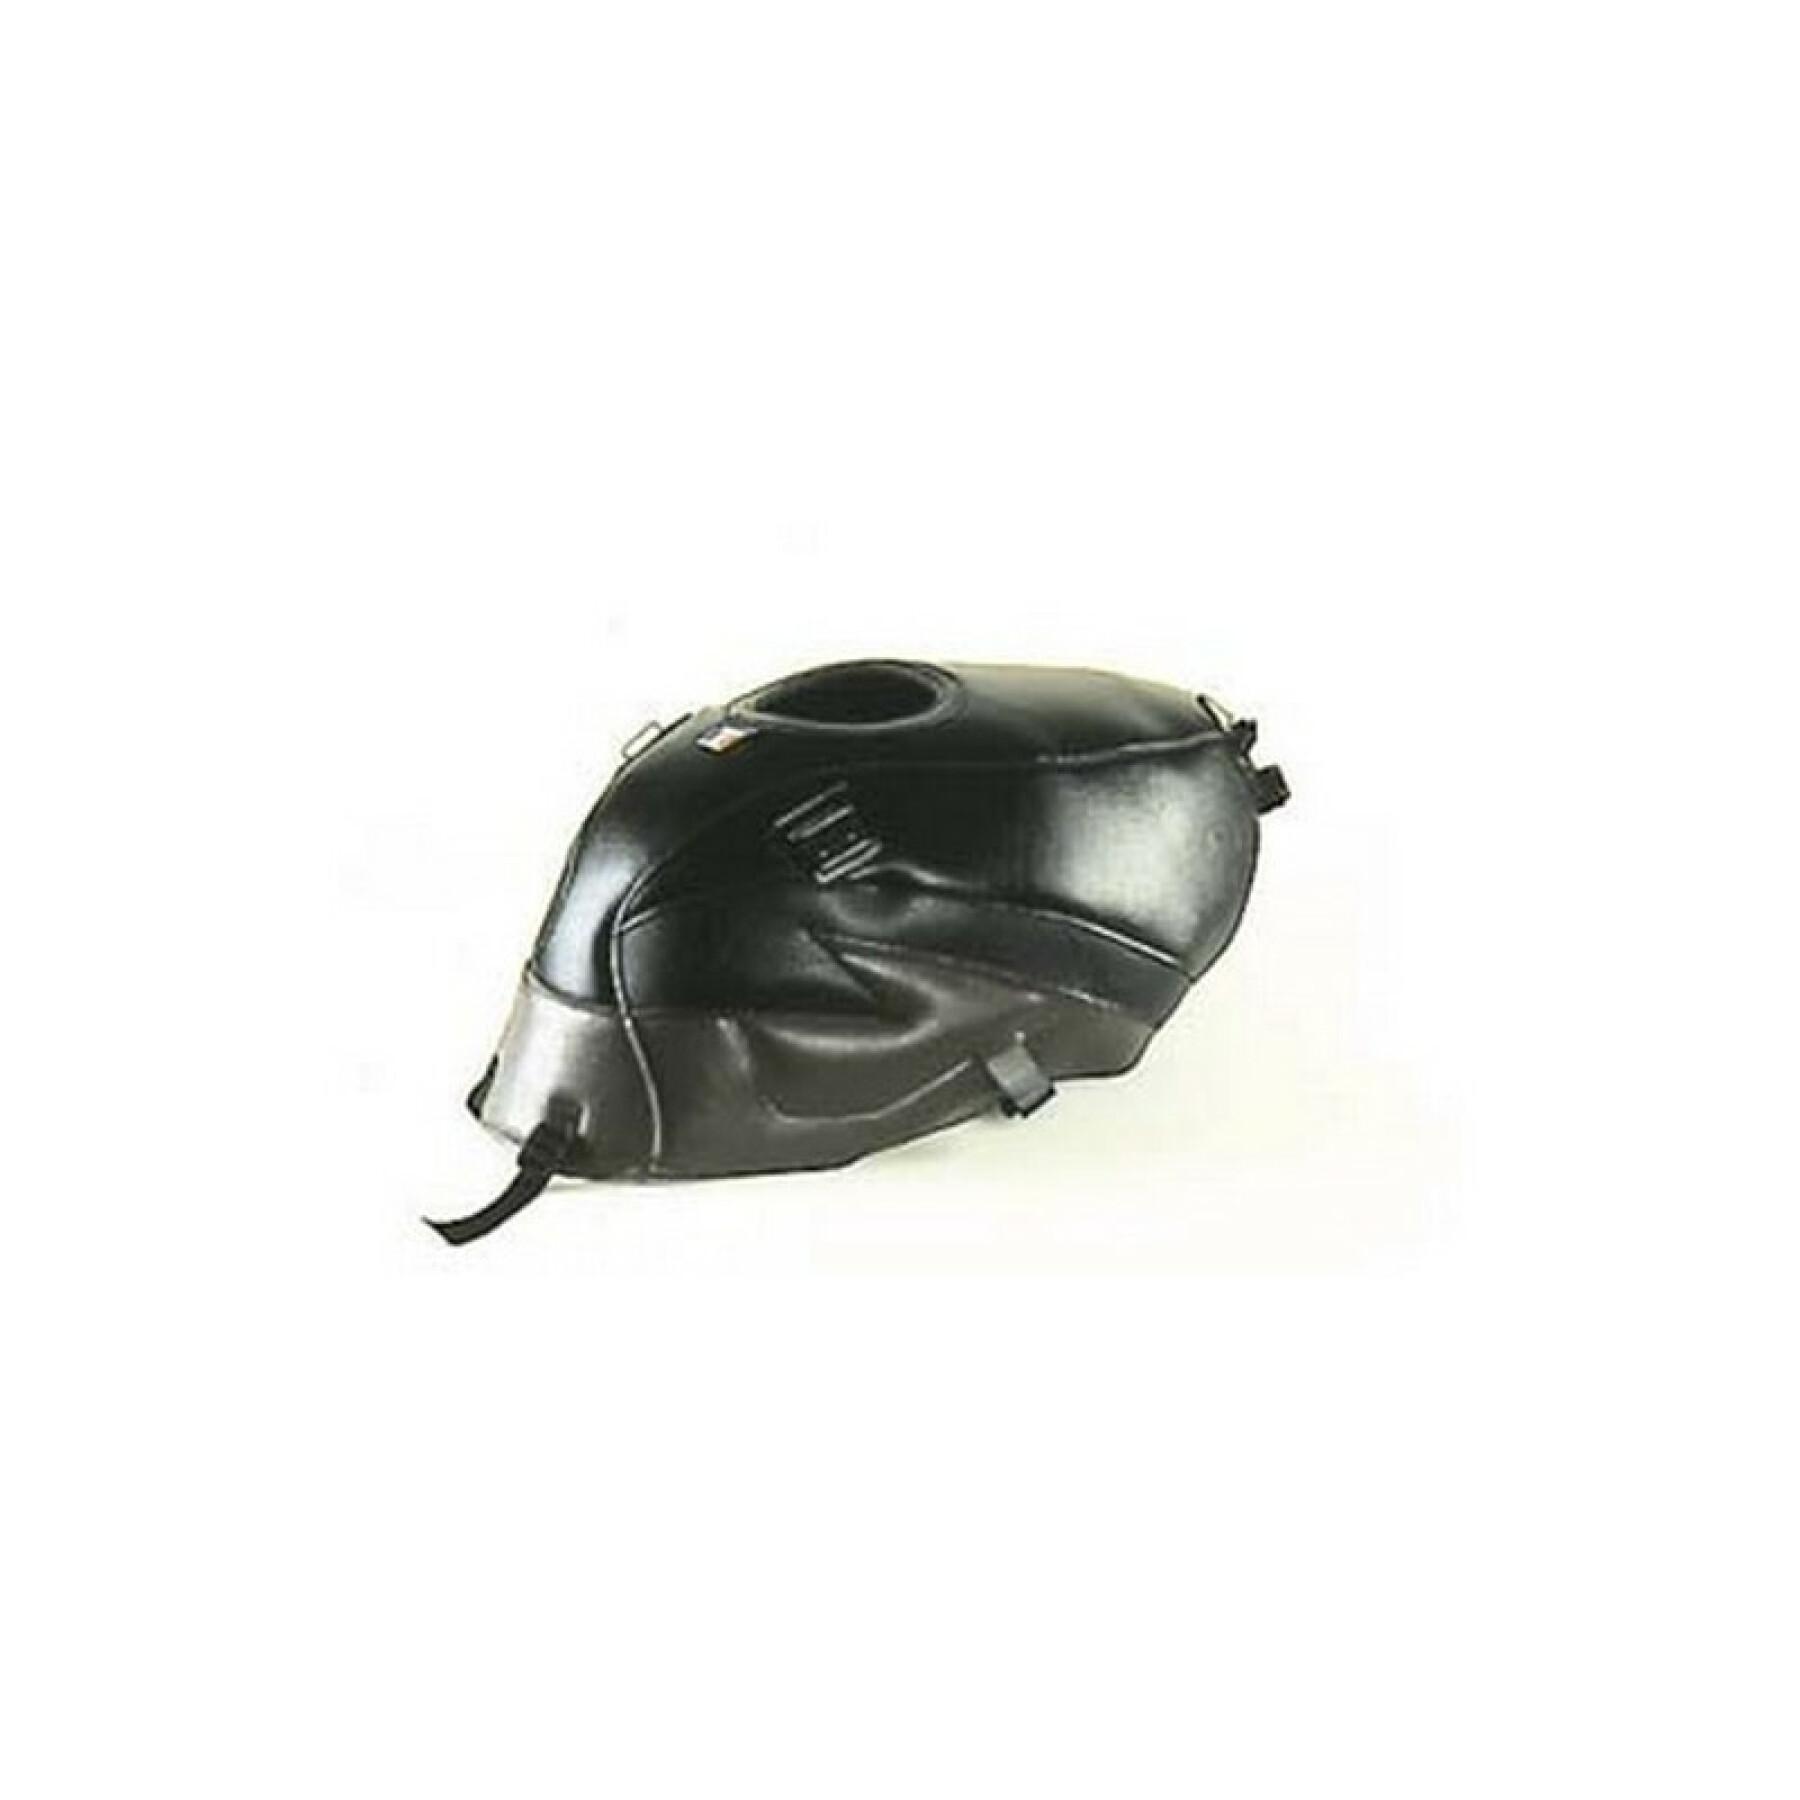 Motorcycle tank cover Bagster zx 6 r